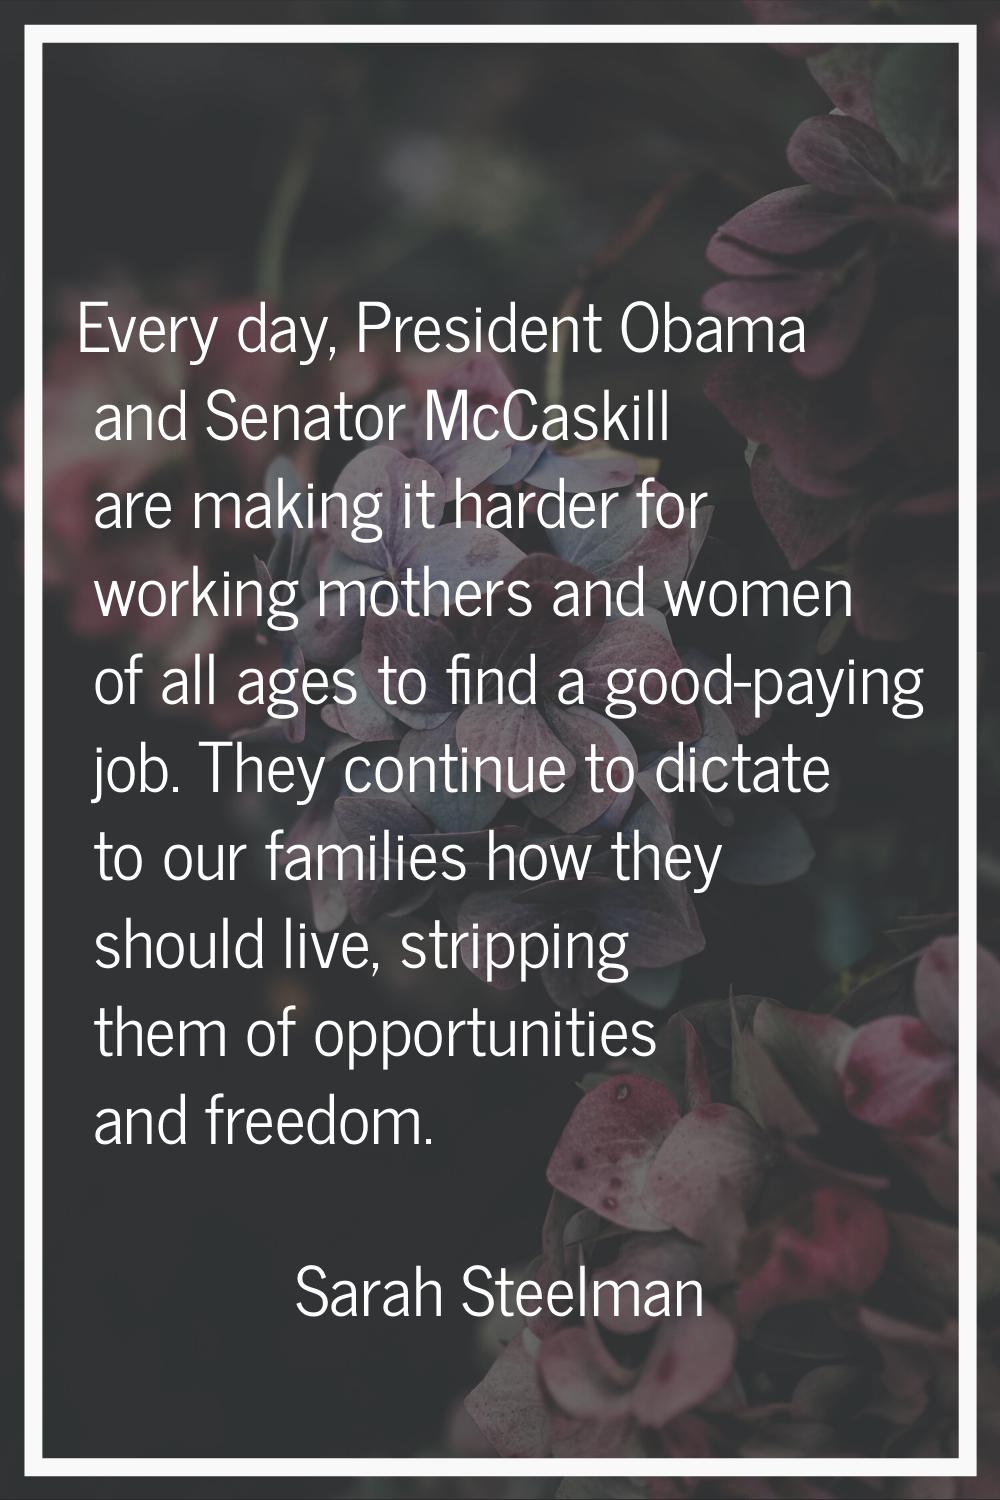 Every day, President Obama and Senator McCaskill are making it harder for working mothers and women